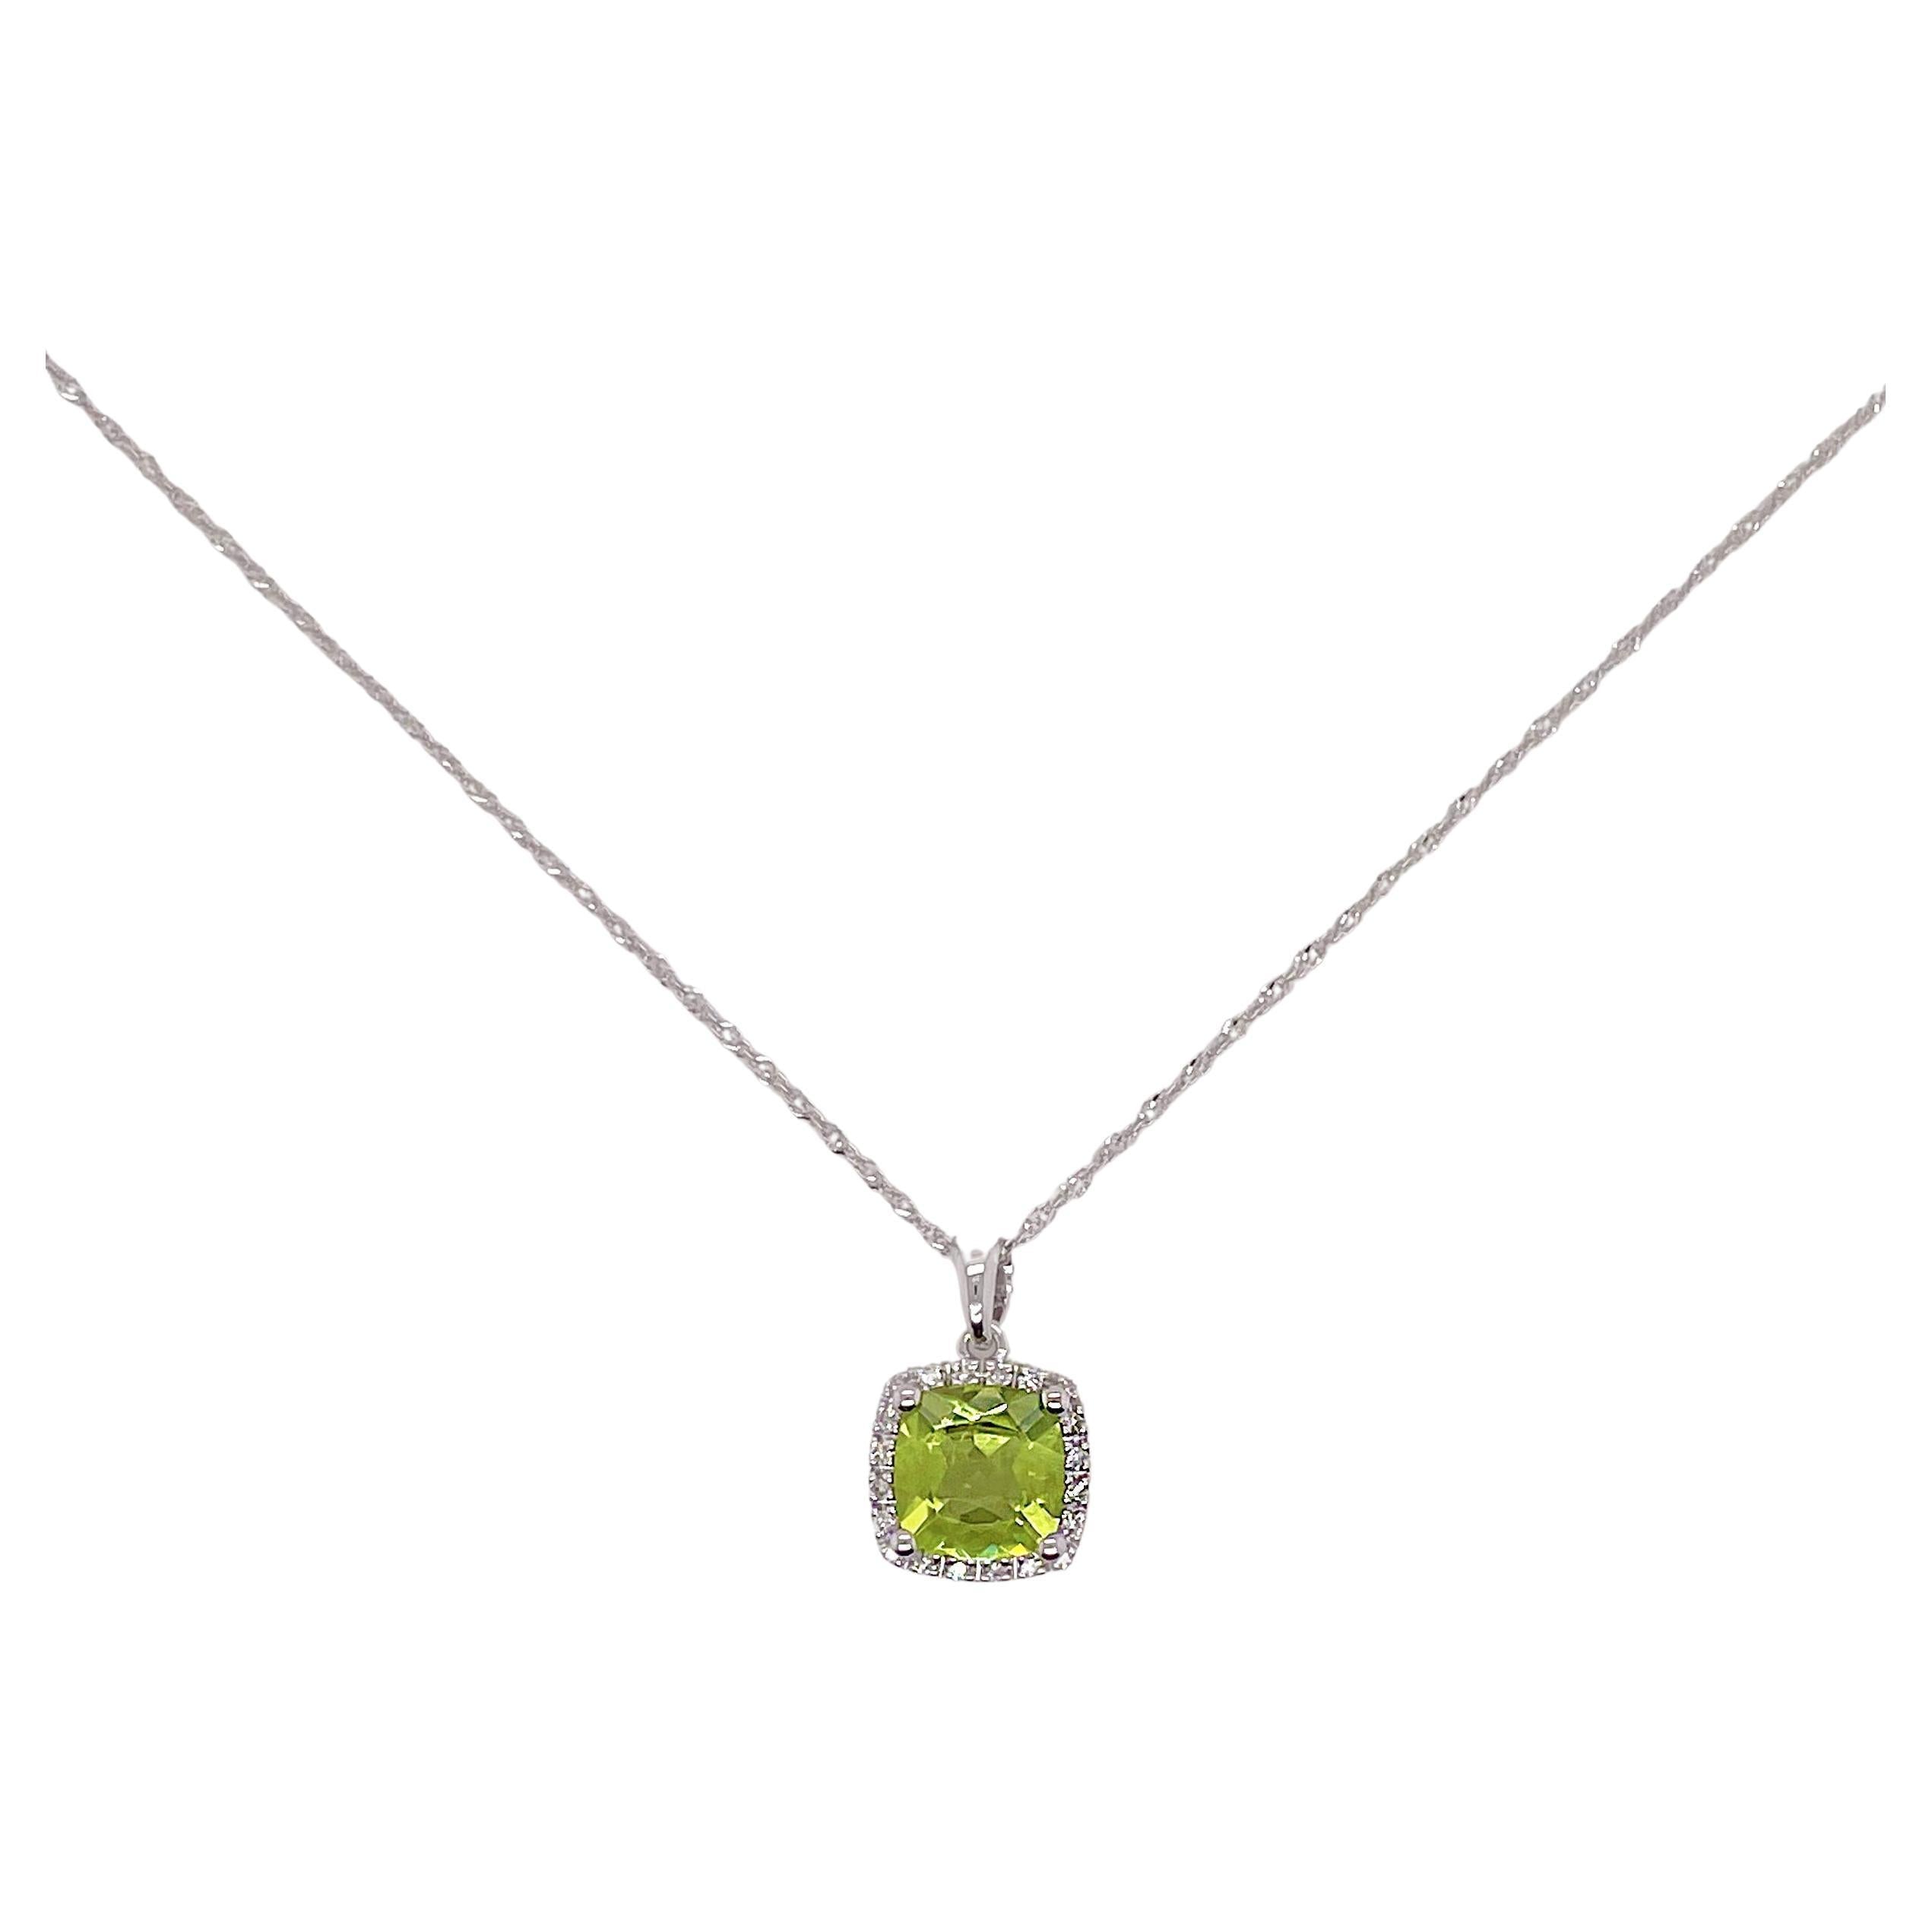 Natural Peridot and Diamond Necklace, 14k Solid Gold Necklace, 0.75 Ca